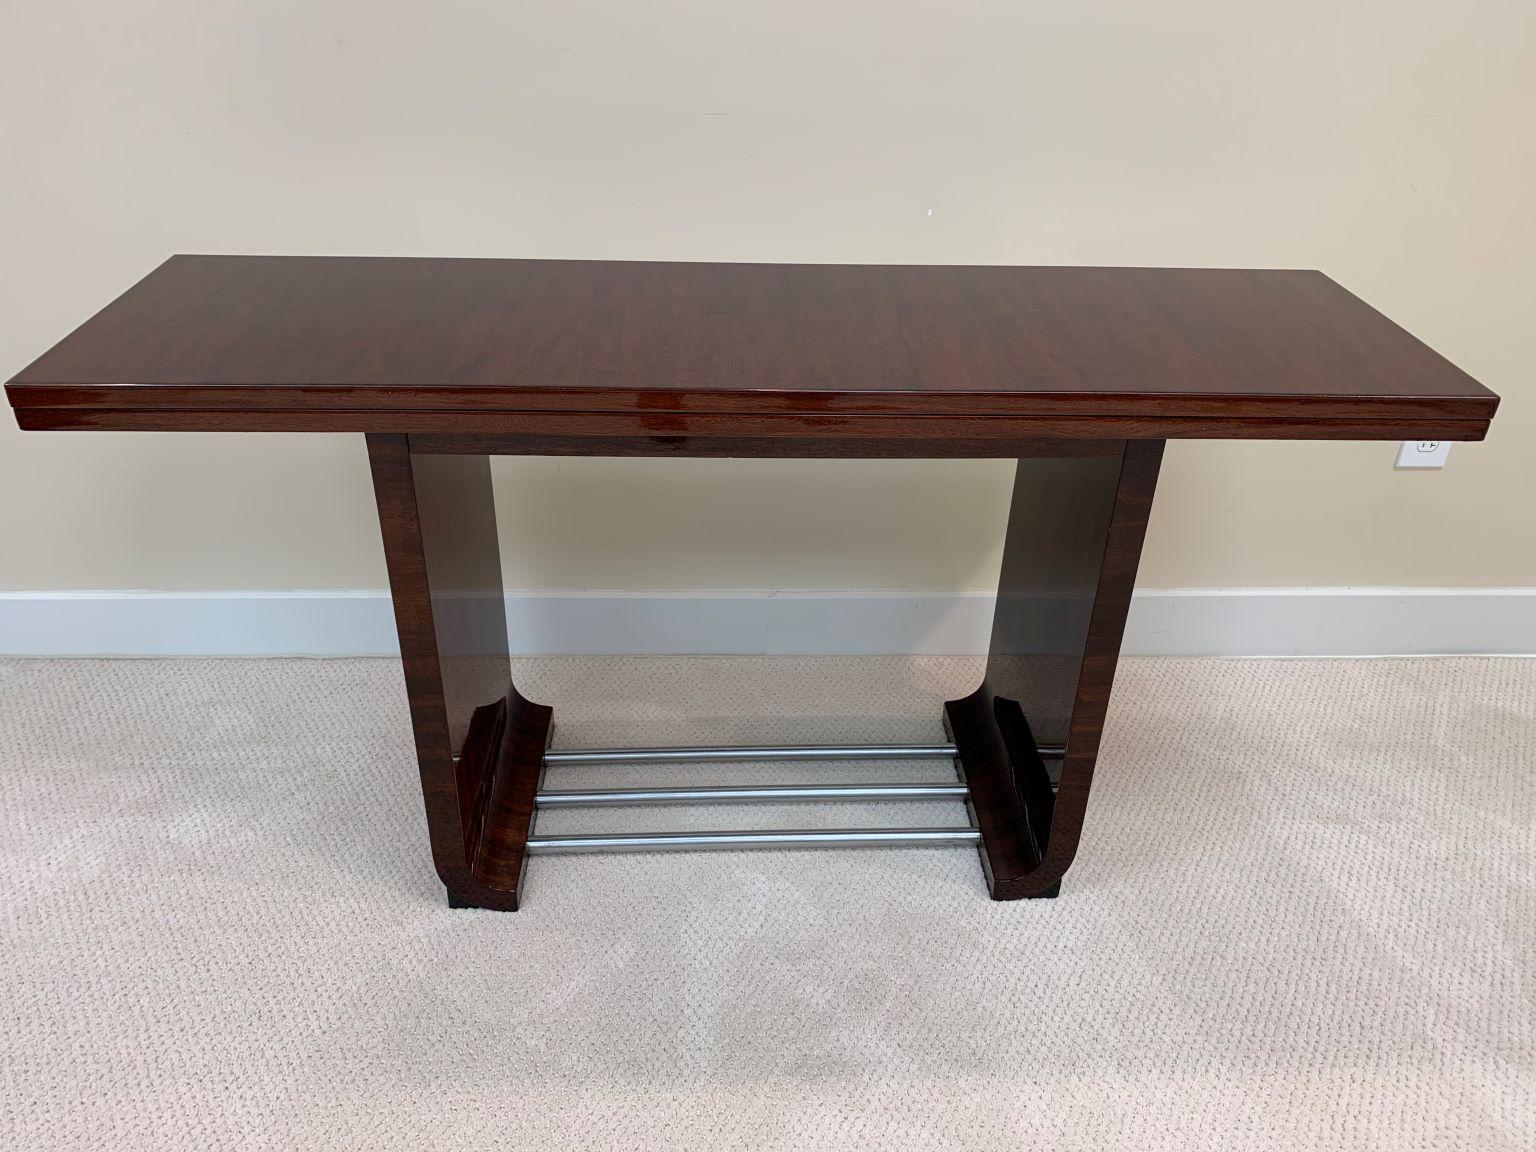 Gilbert Rohde Art Deco flip-top dining console for Herman Miller. Gilbert Rohde designed this American Art Deco console dining table in 1934 for the Herman Miller Furniture Company. It is No. 3435 from his East India Laurel Group. The console is